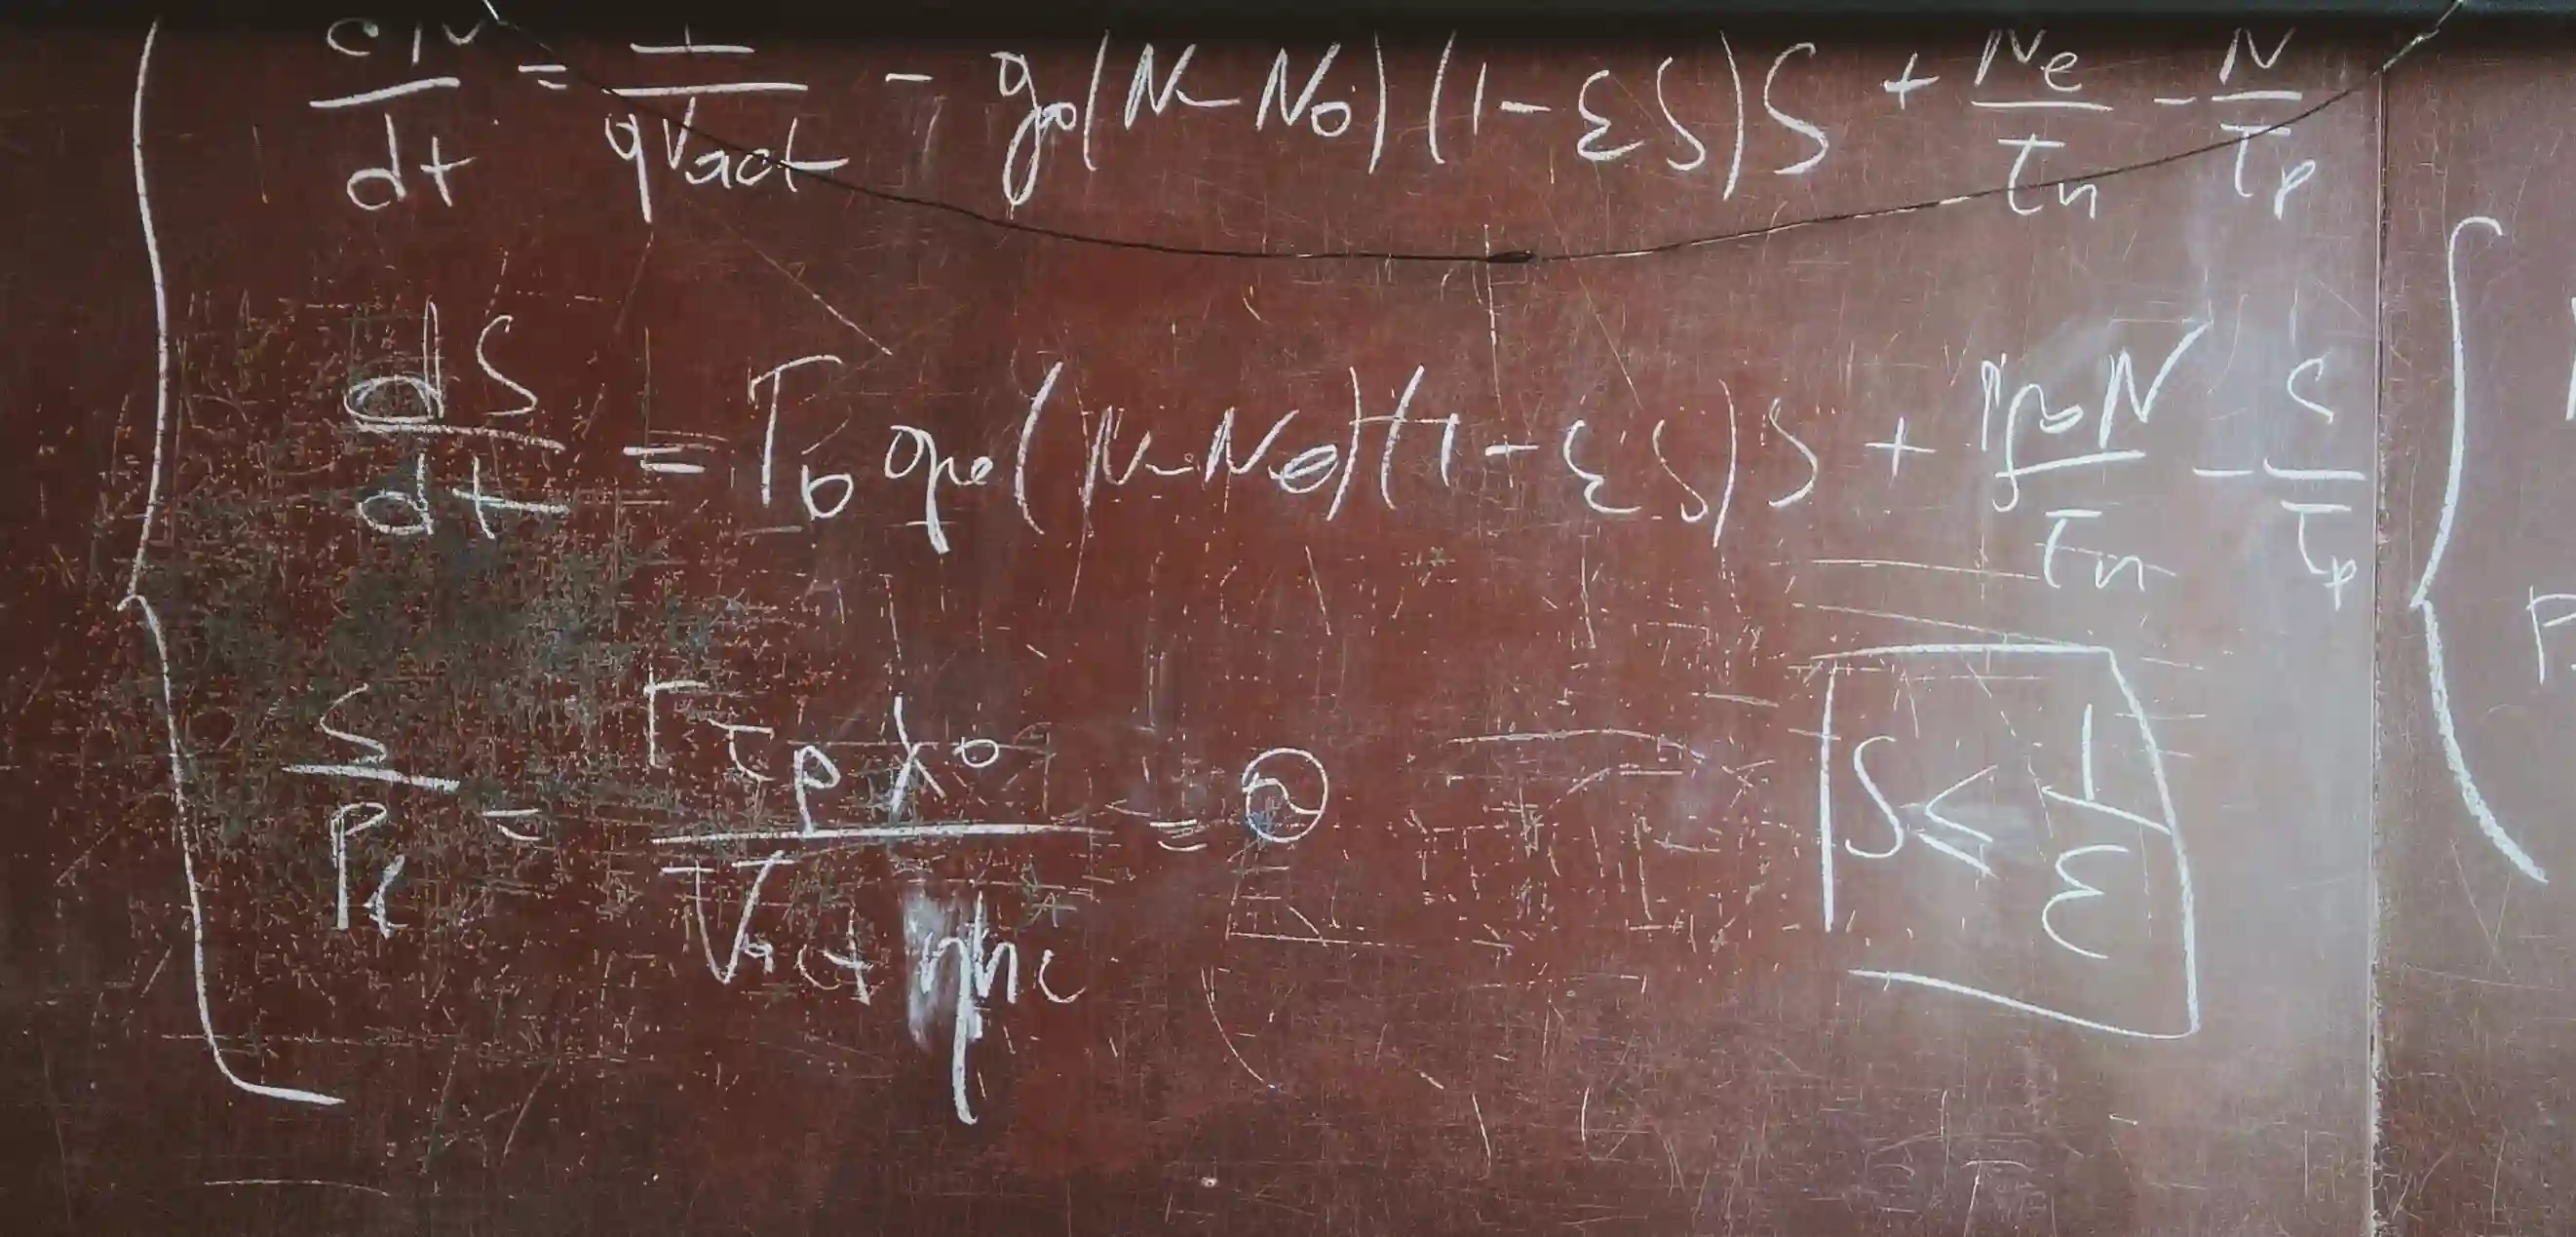 A chalkboard with complex equations written on it